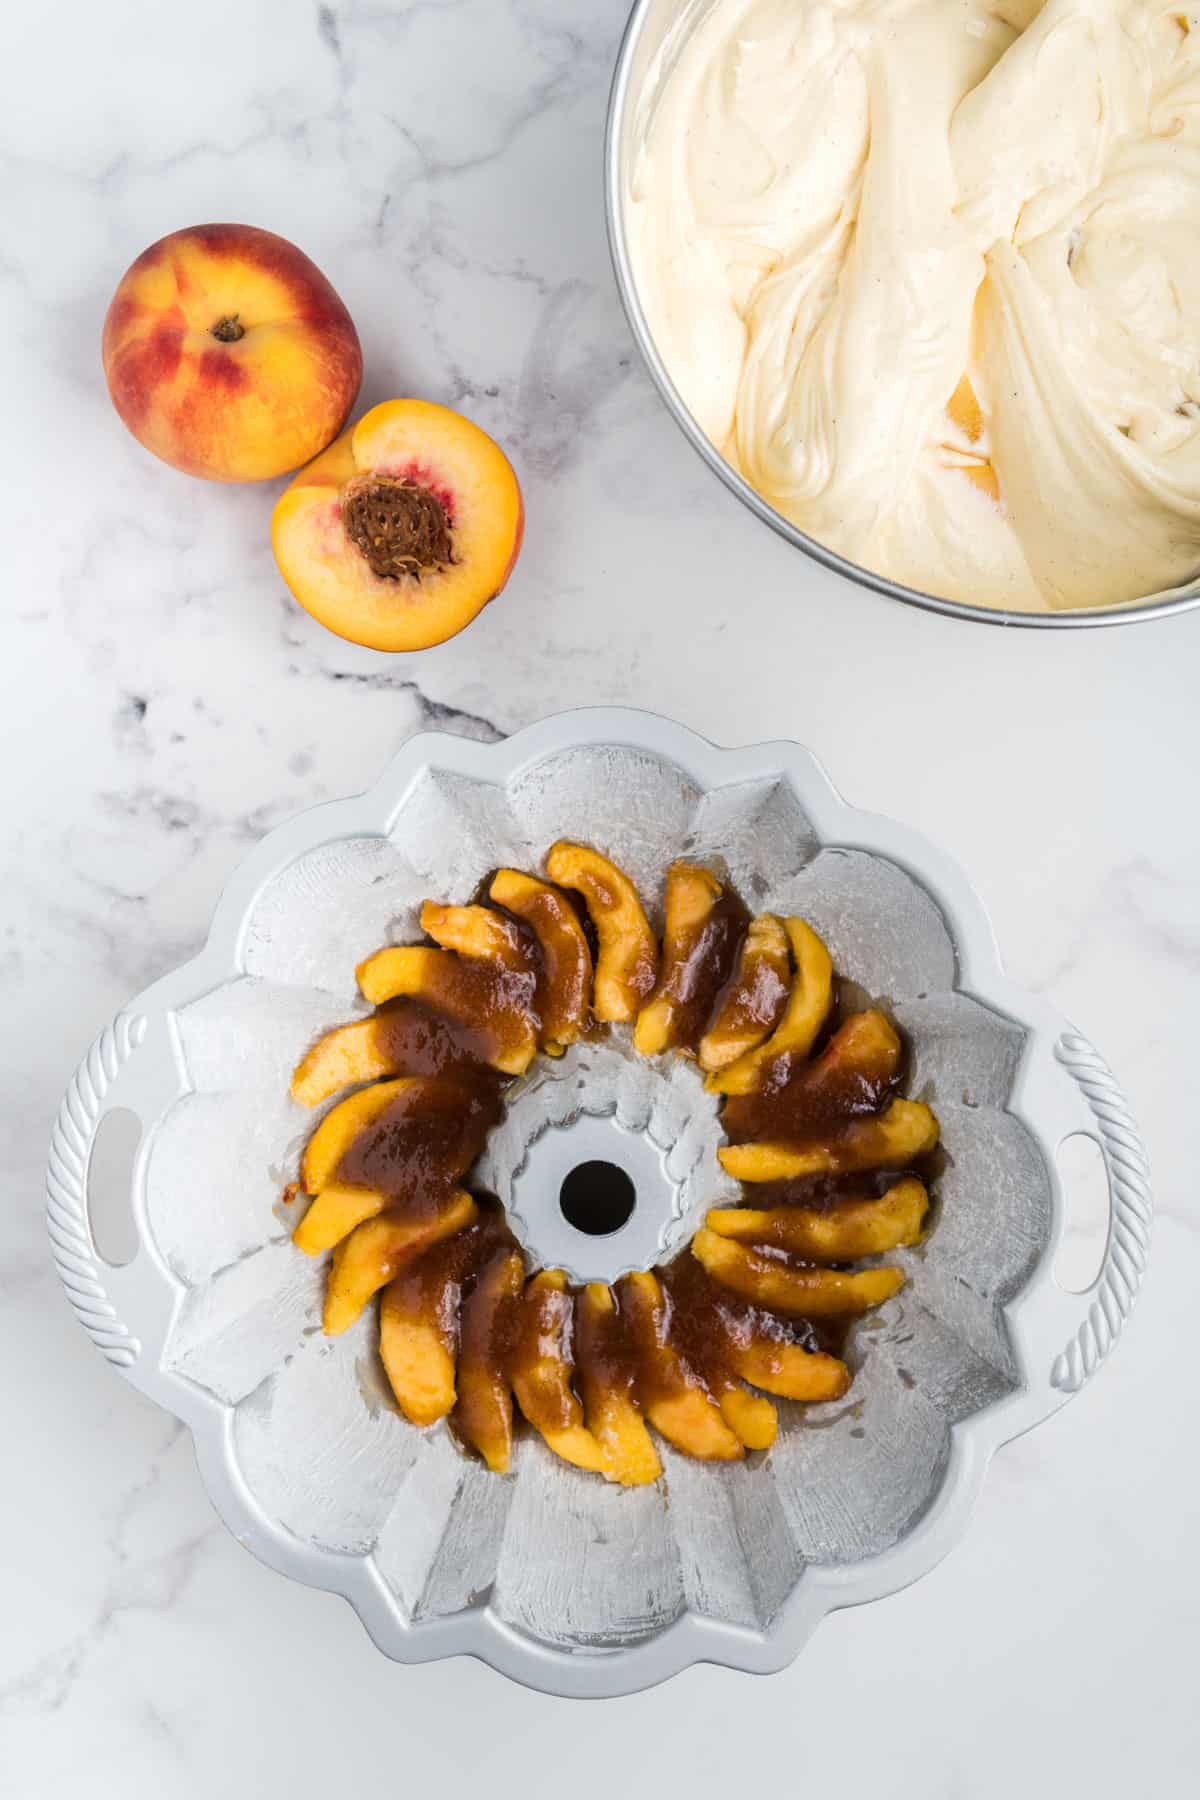 Peaches layered in the bottom of a bundt pan with brown sugar and butter mixture on top.